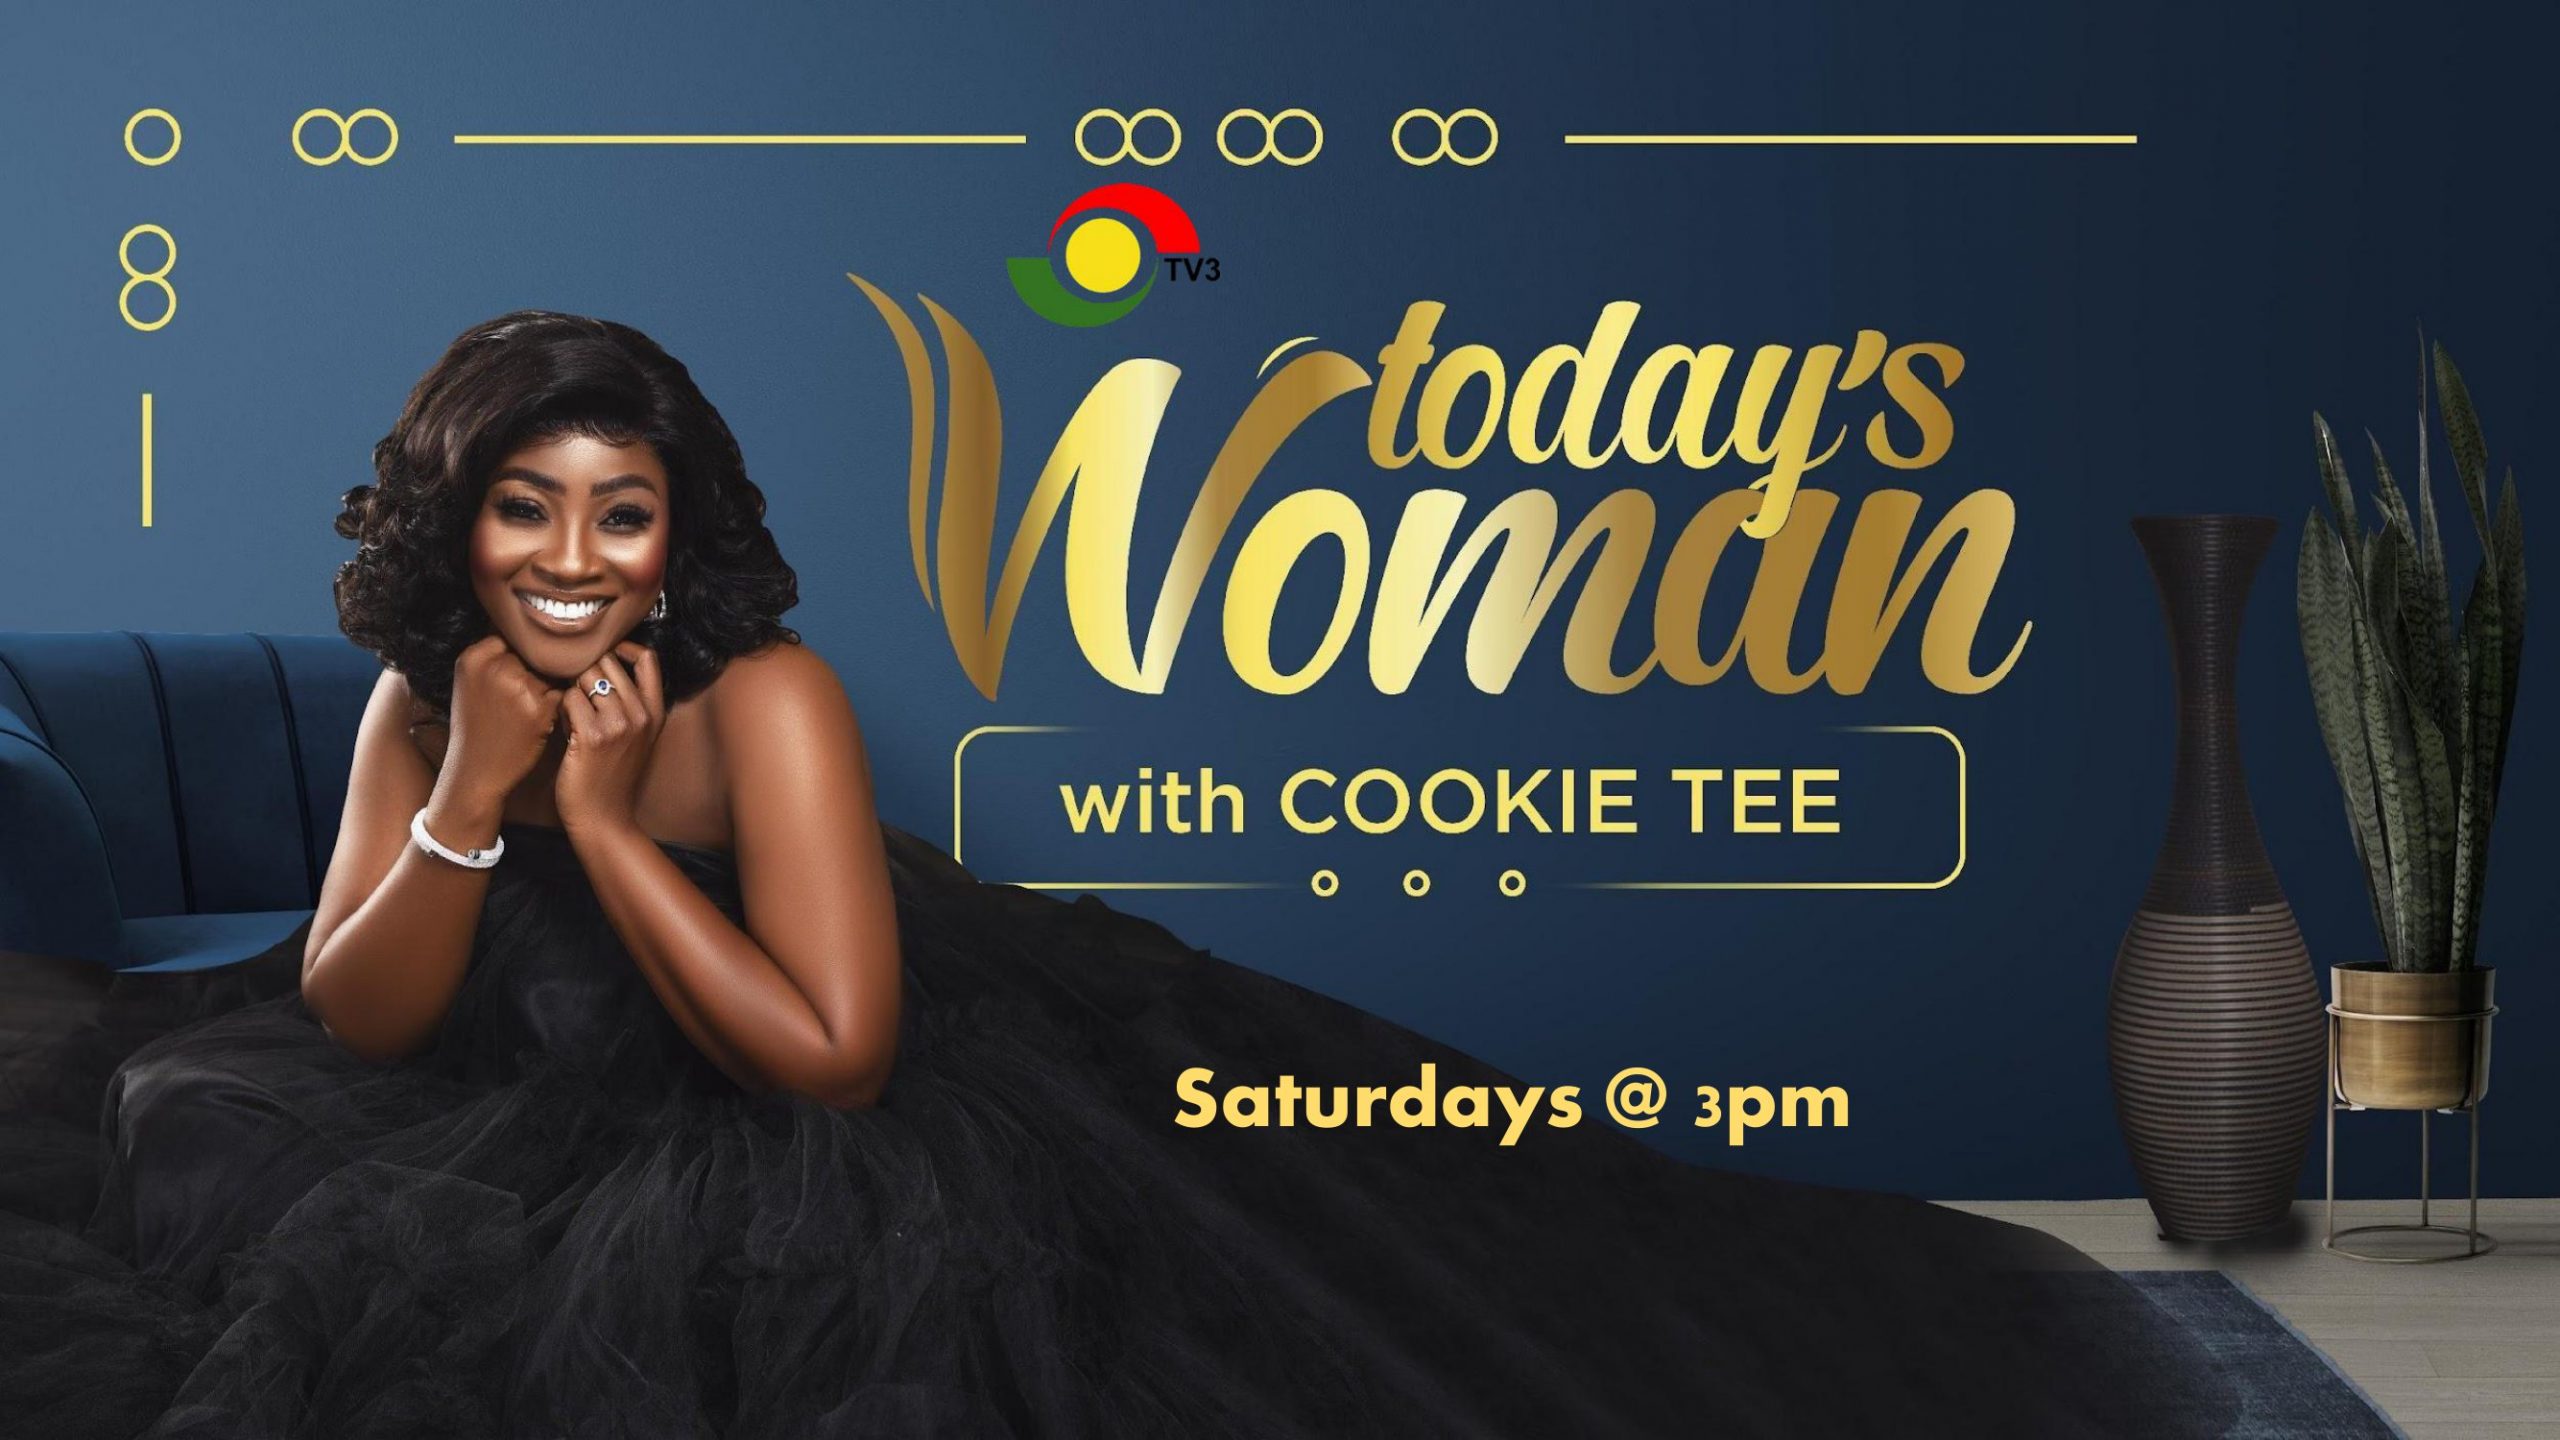 Cookie Tee takes on Brand New Season on TV3’s Today’s Woman￼